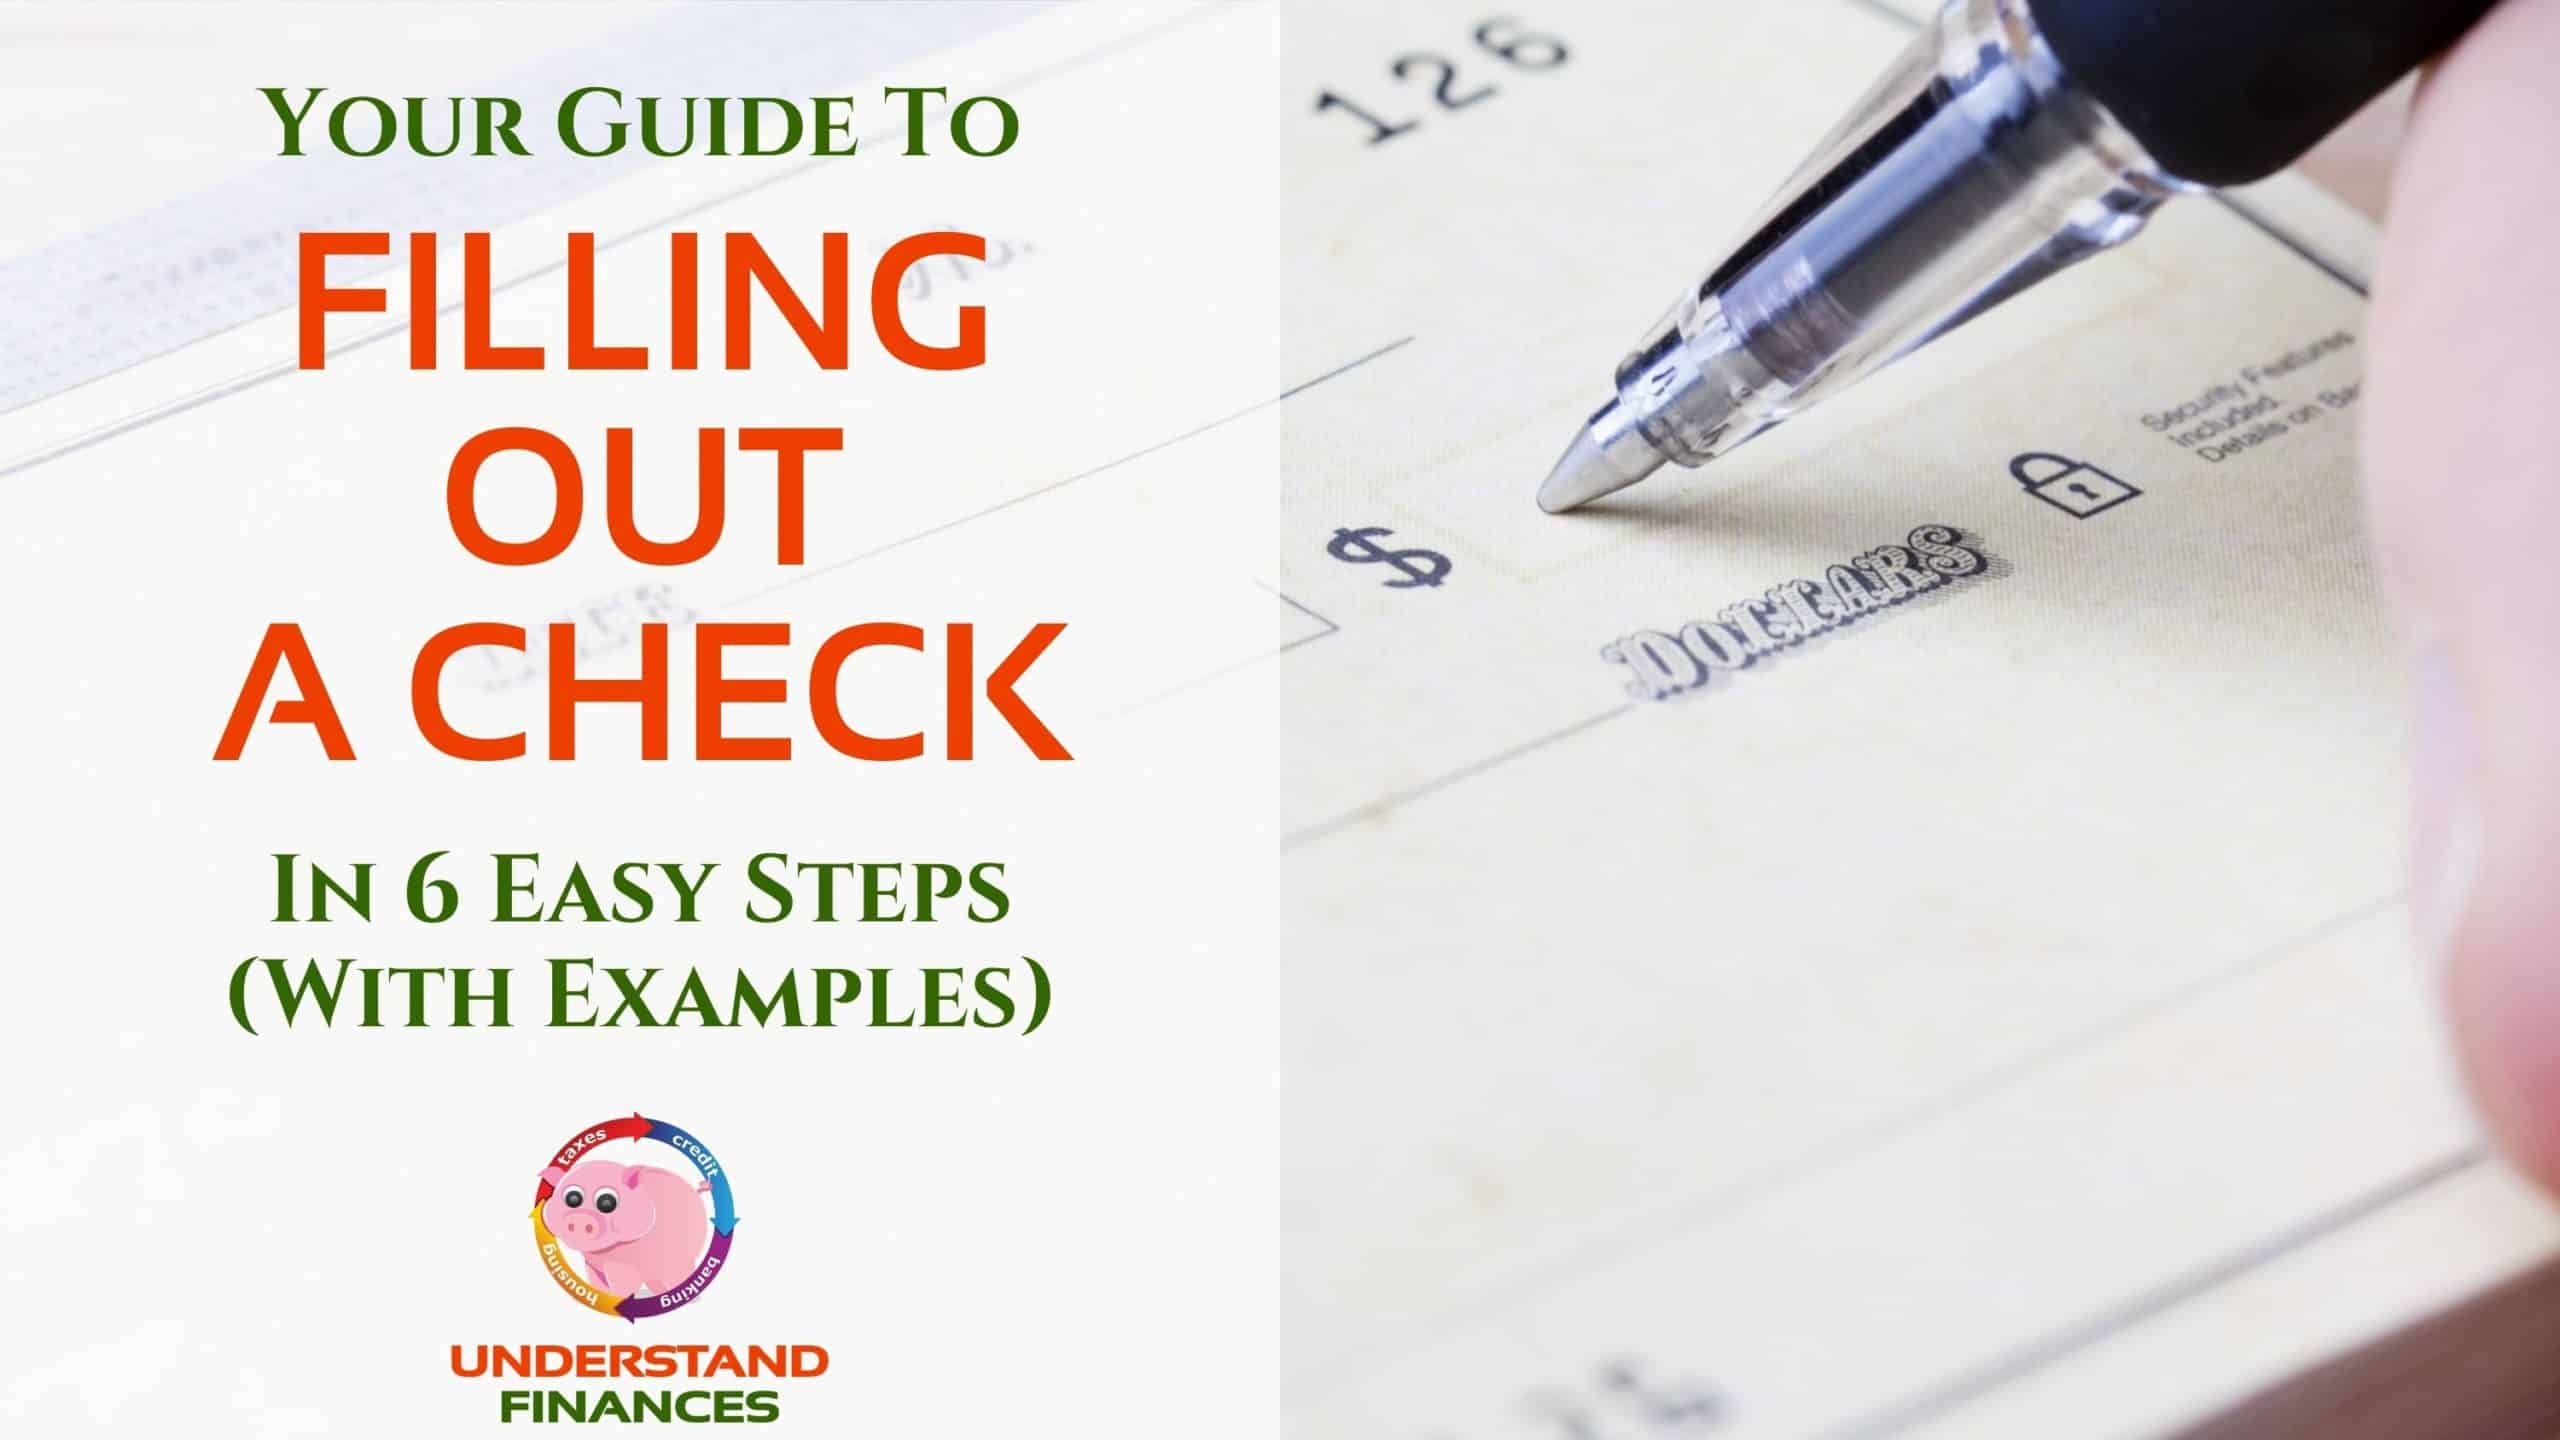 Your Guide To Filling Out A Check In 6 Easy Steps (With Examples)